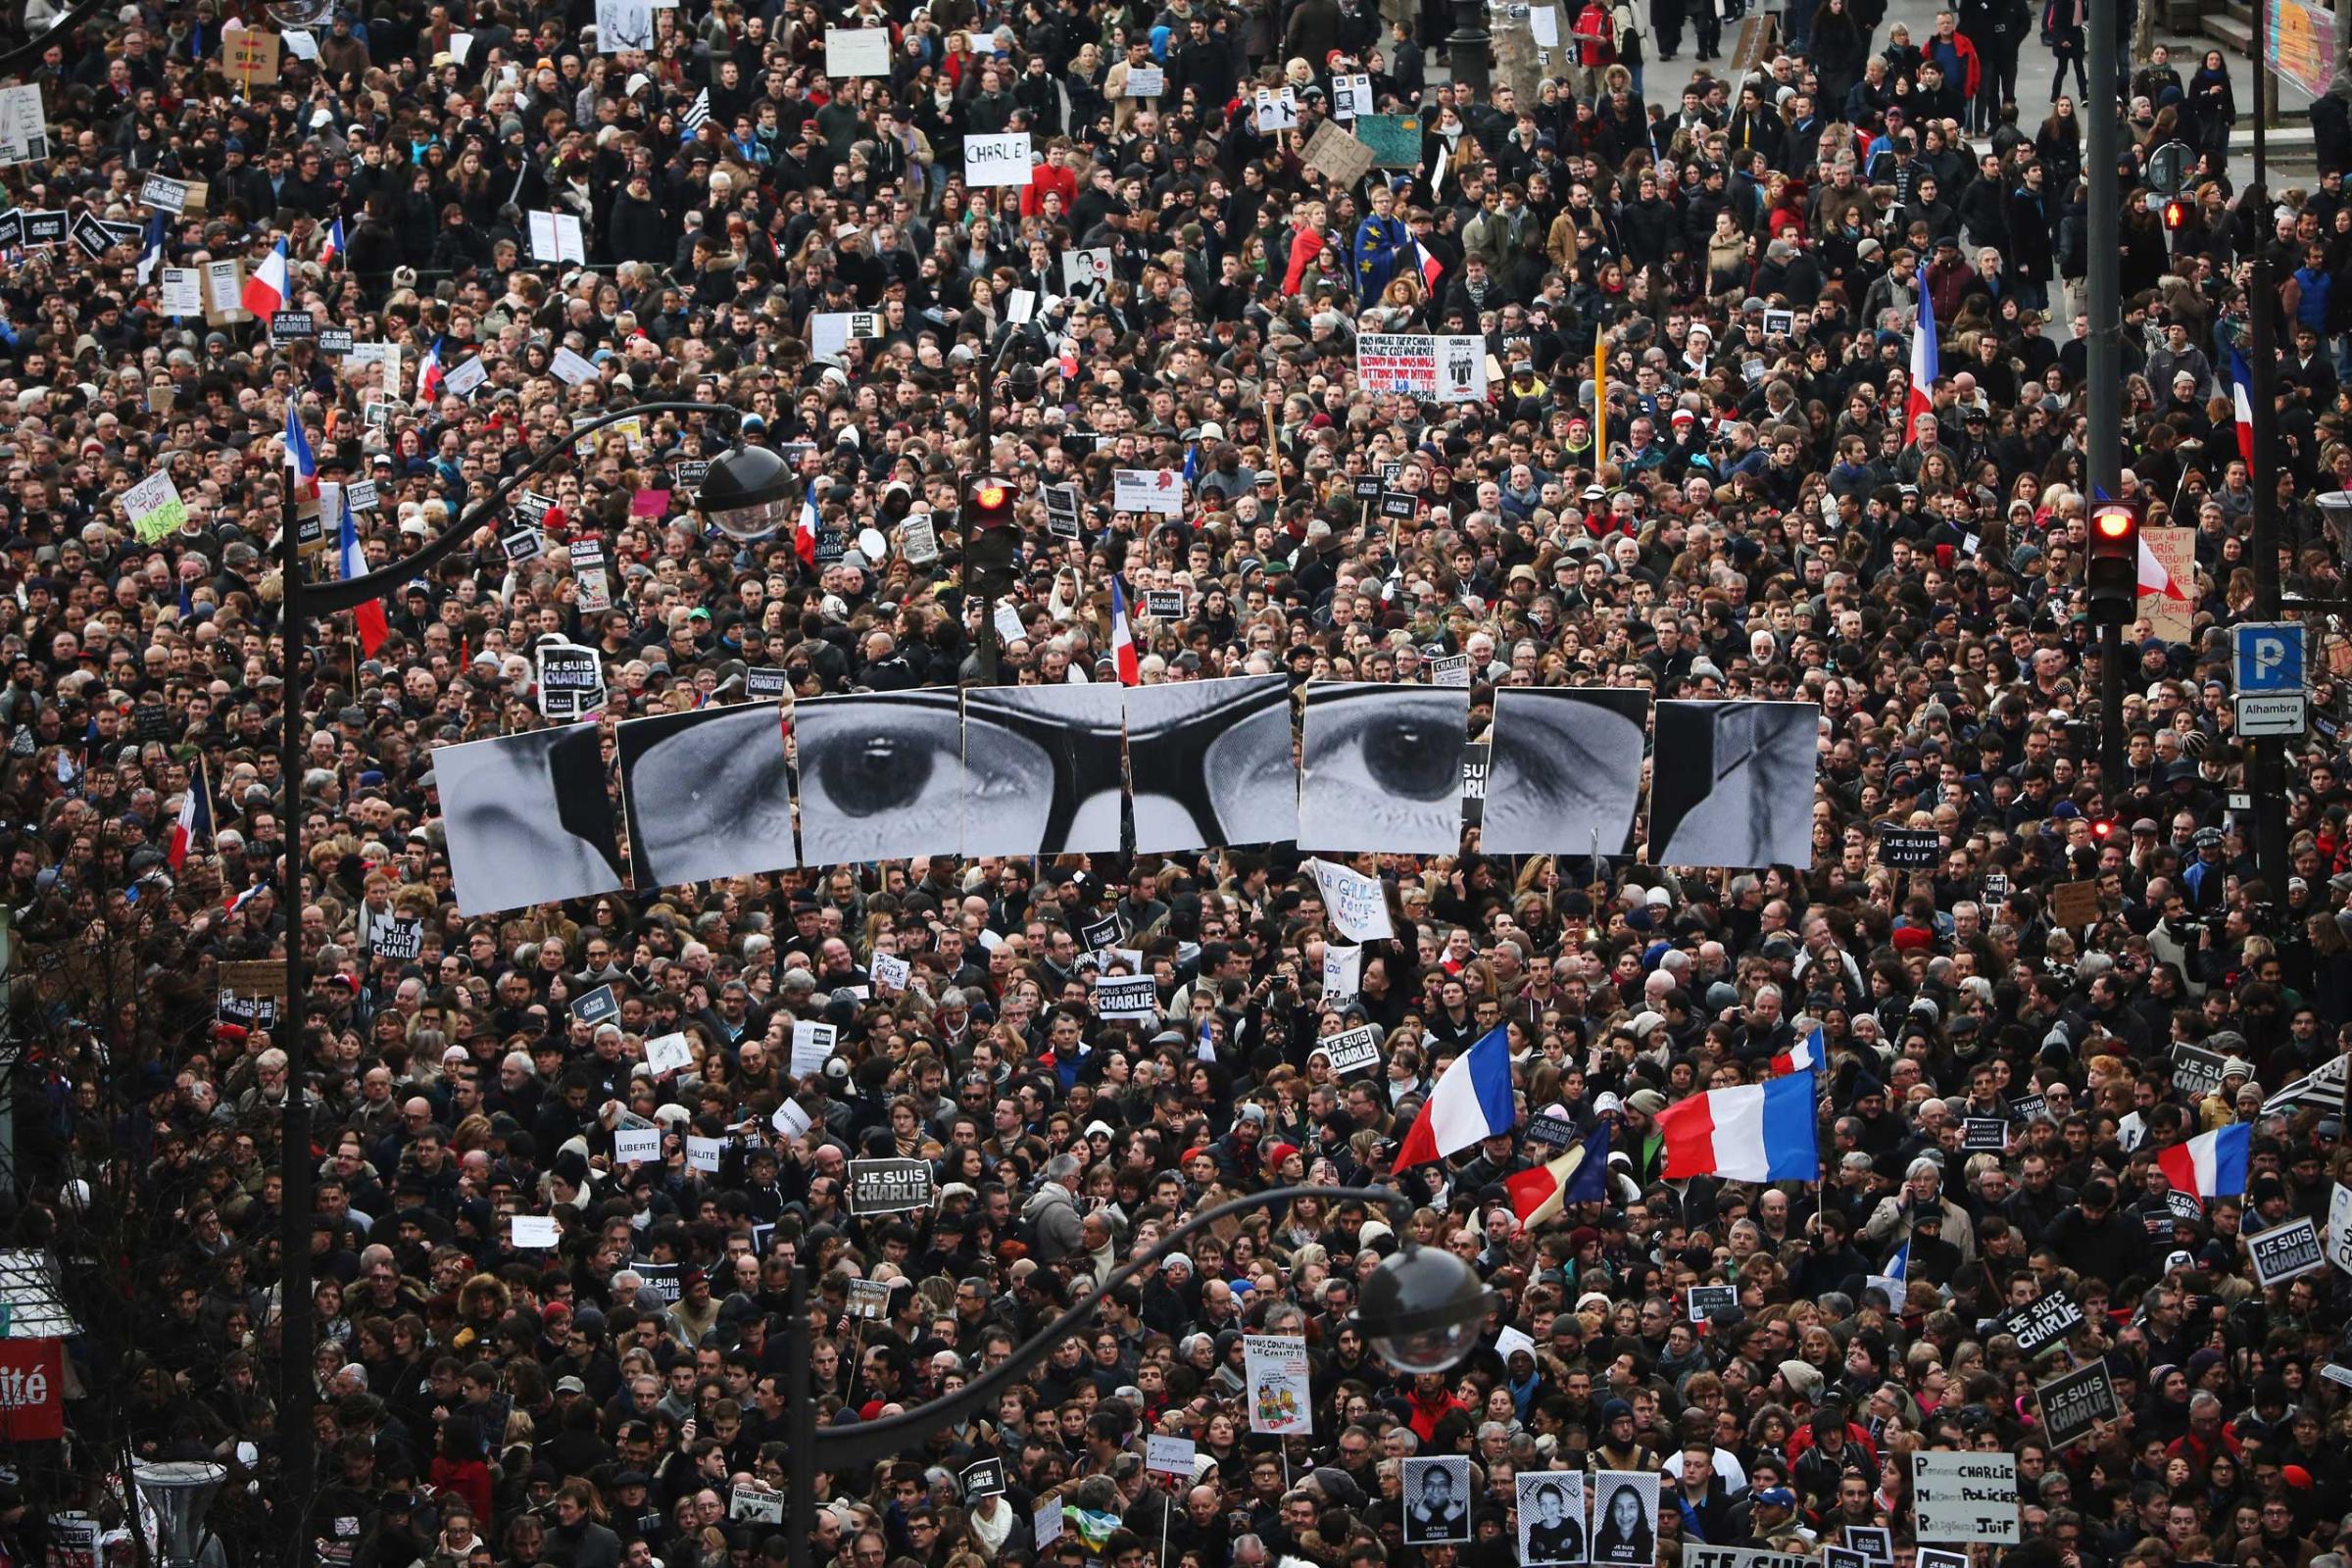 Demonstrators make their way along Boulevrd Voltaire in a unity rally in Paris following the recent terrorist attacks on Jan. 11, 2015 in Paris.